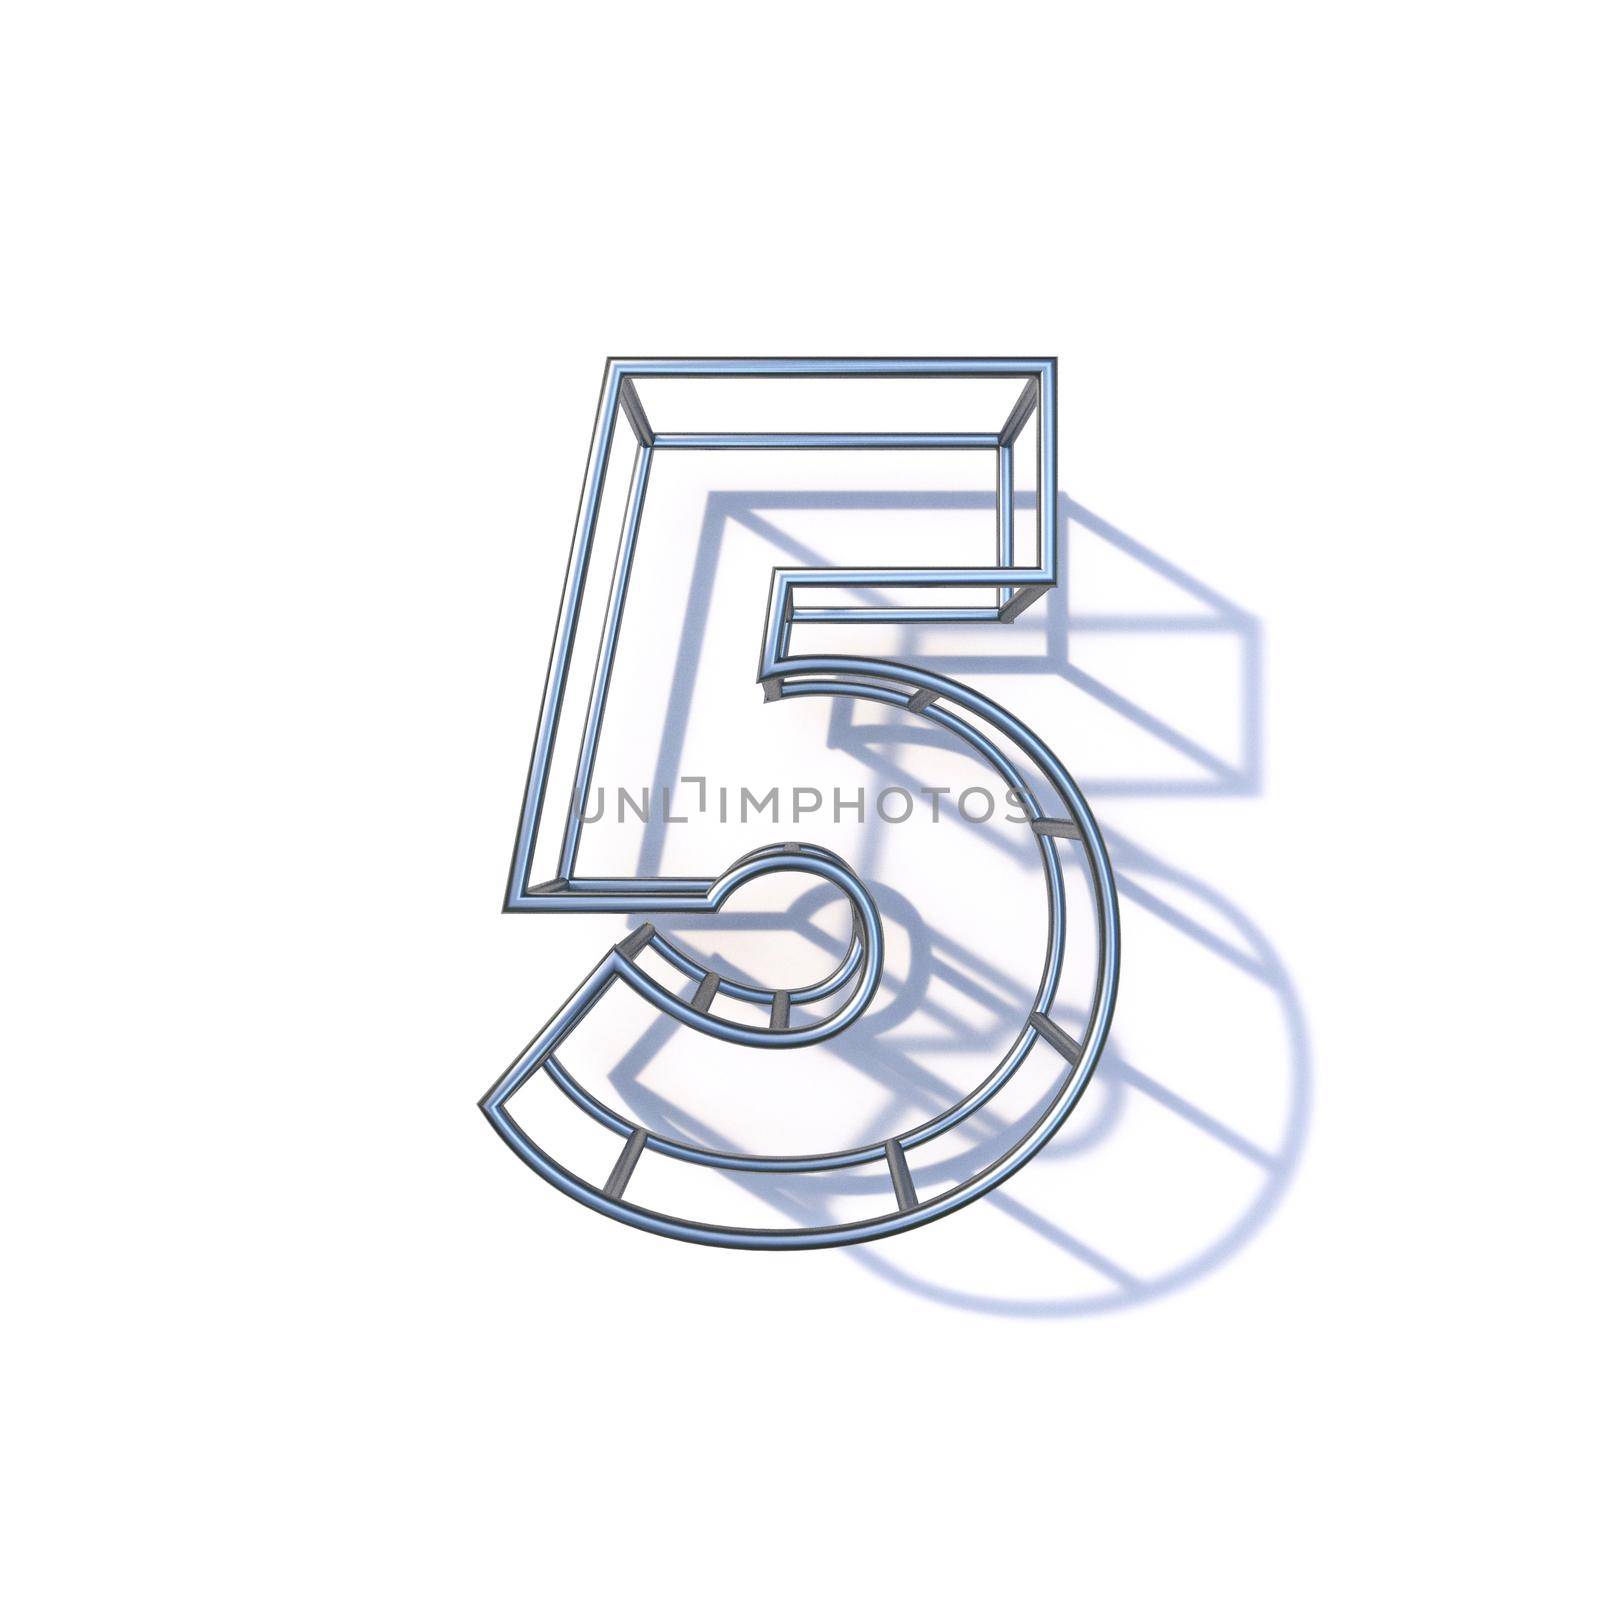 Steel wire frame font Number 5 FIVE 3D render illustration isolated on white background